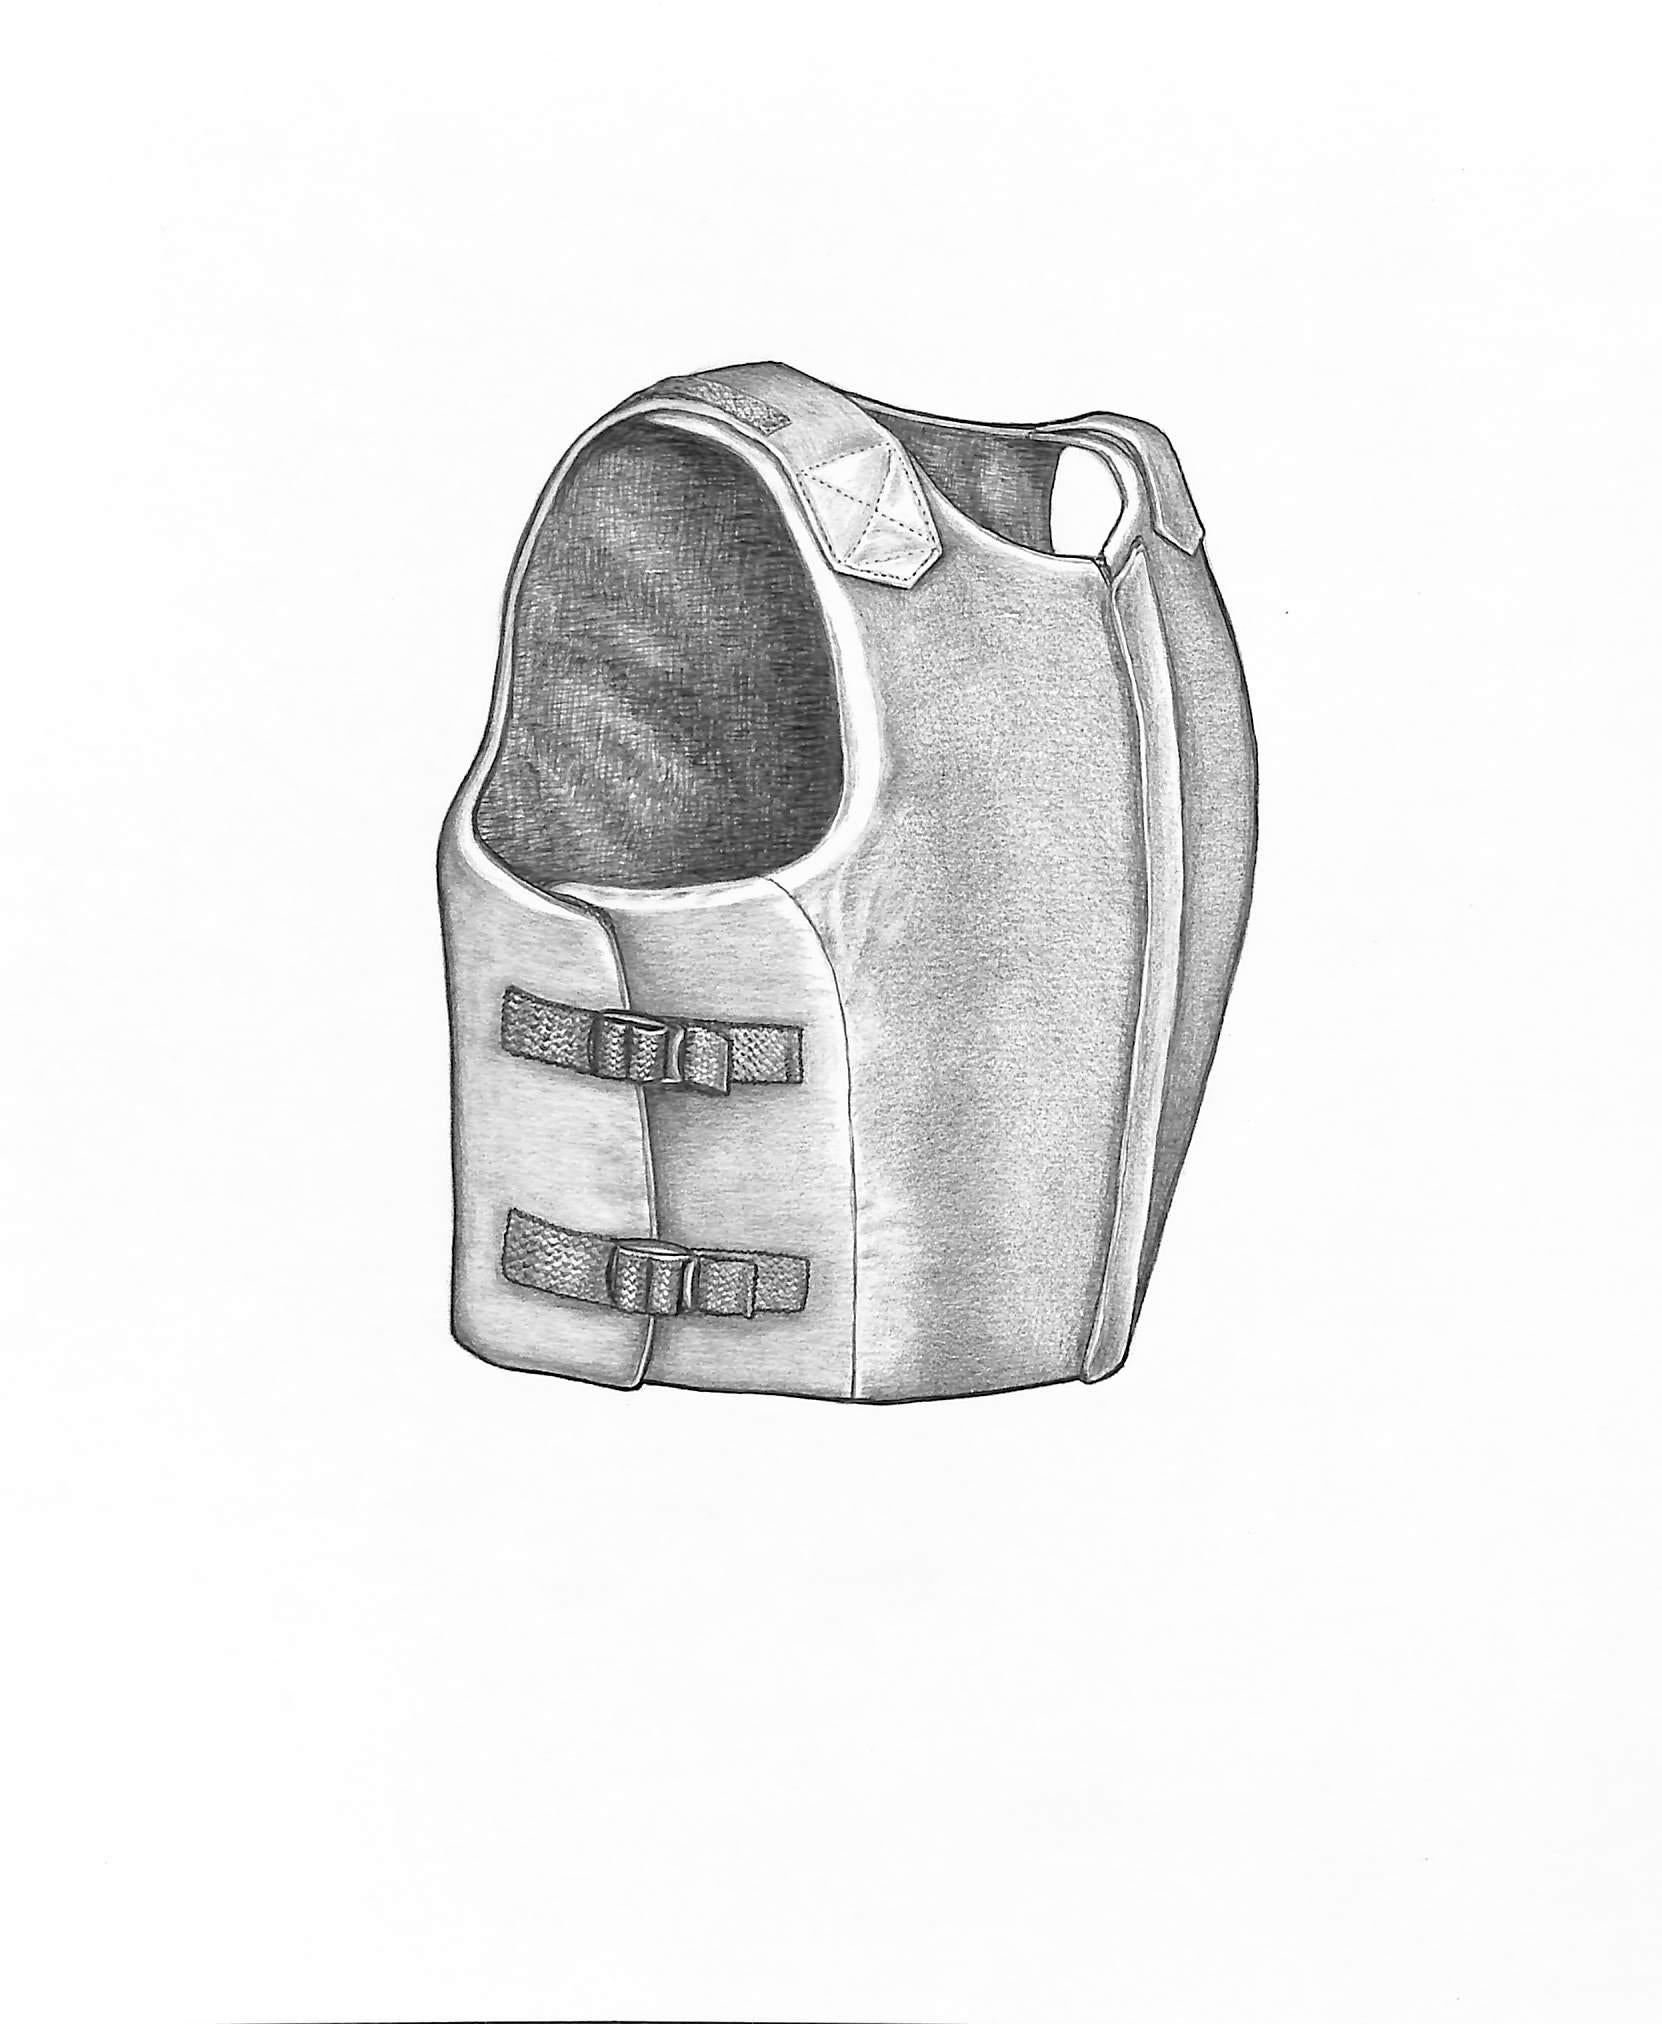 ASTM/ FEI Approved Safety Vest 1999 Graphite Drawing - Art by Unknown